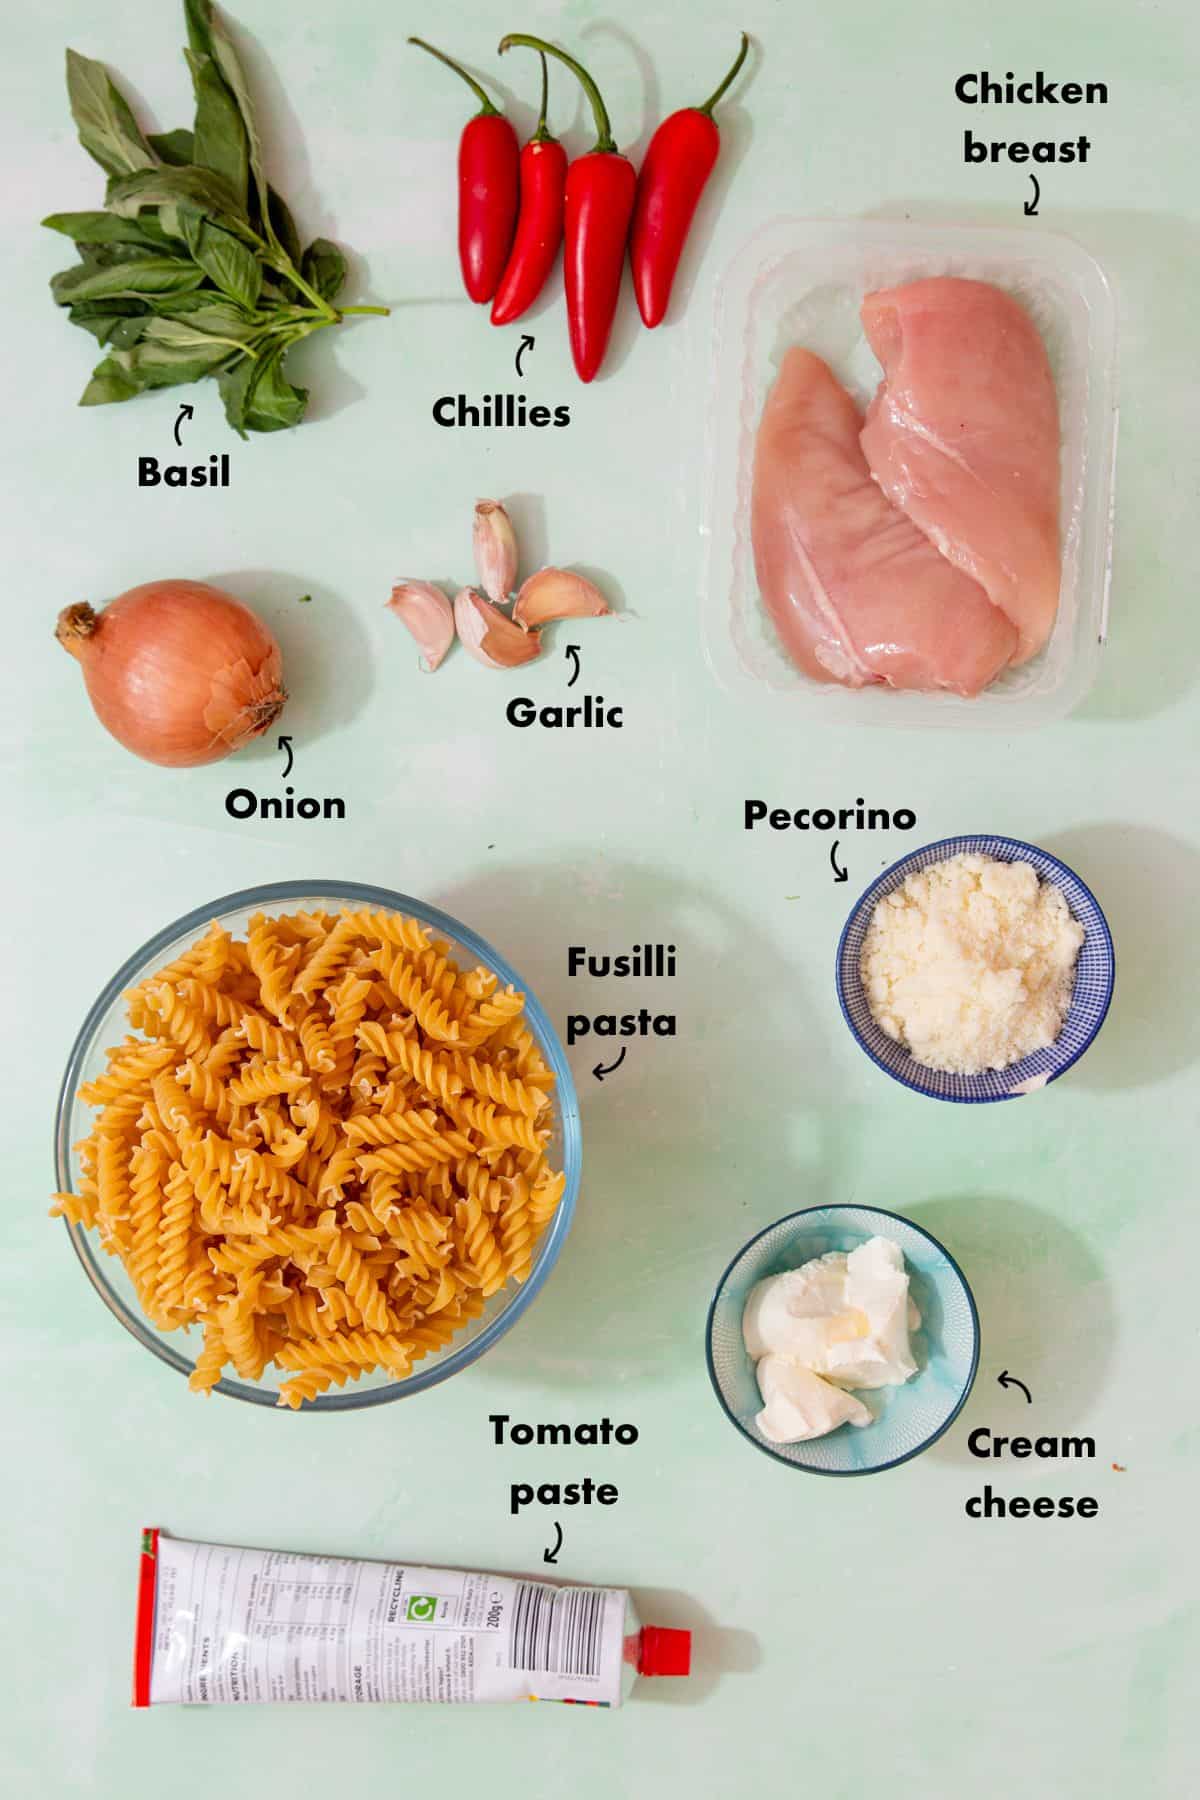 Ingredients to make a chicken pasta recipe laid out on a pale blue background and labelled.